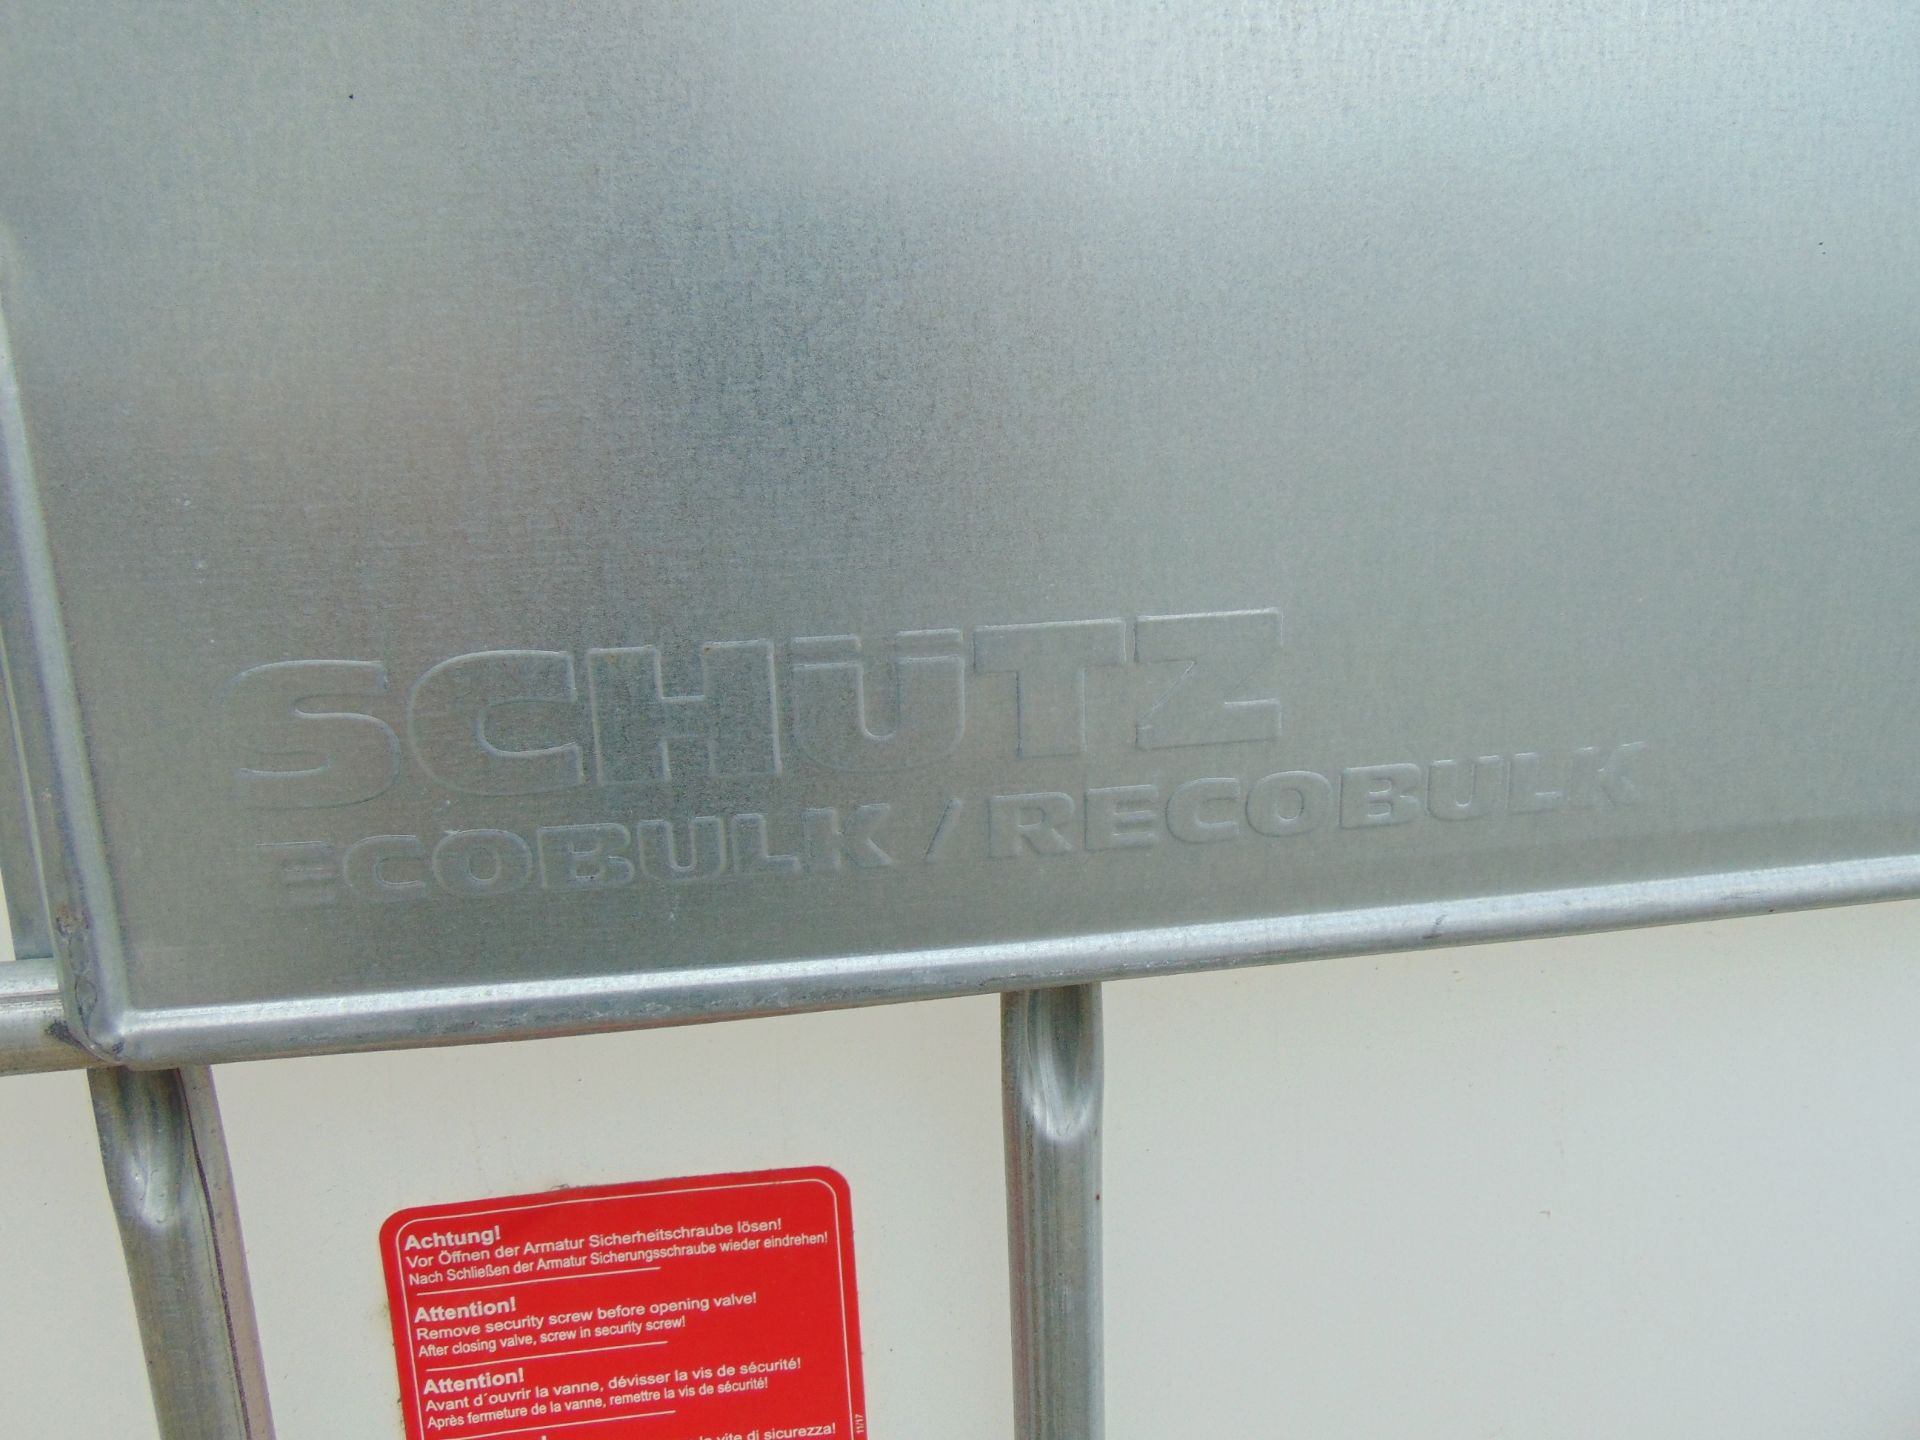 New Unused 1000 Litre Schutz IBC Container / Caged Water Tank - Image 7 of 7